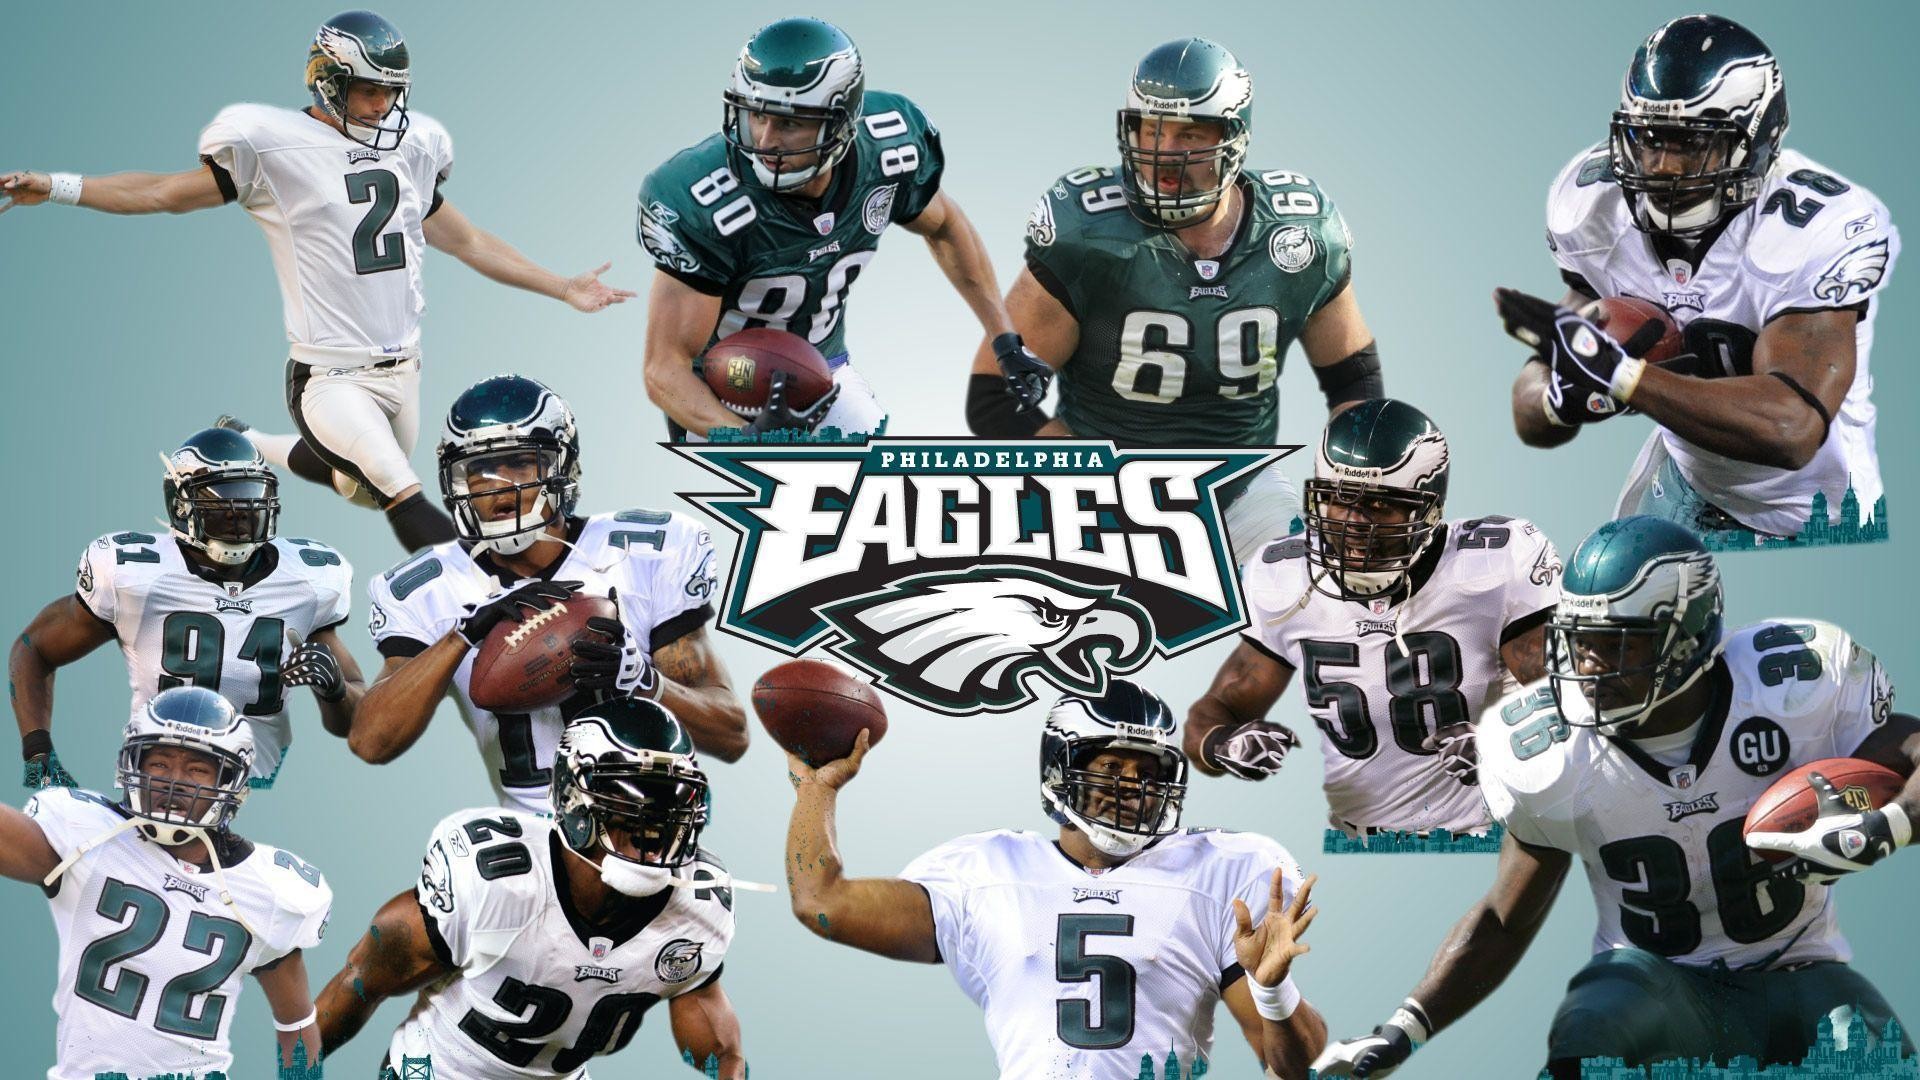 1920x1080 Fascinating Philadelphia Eagles Hd Wallpapers Pictures 1280x1024PX .